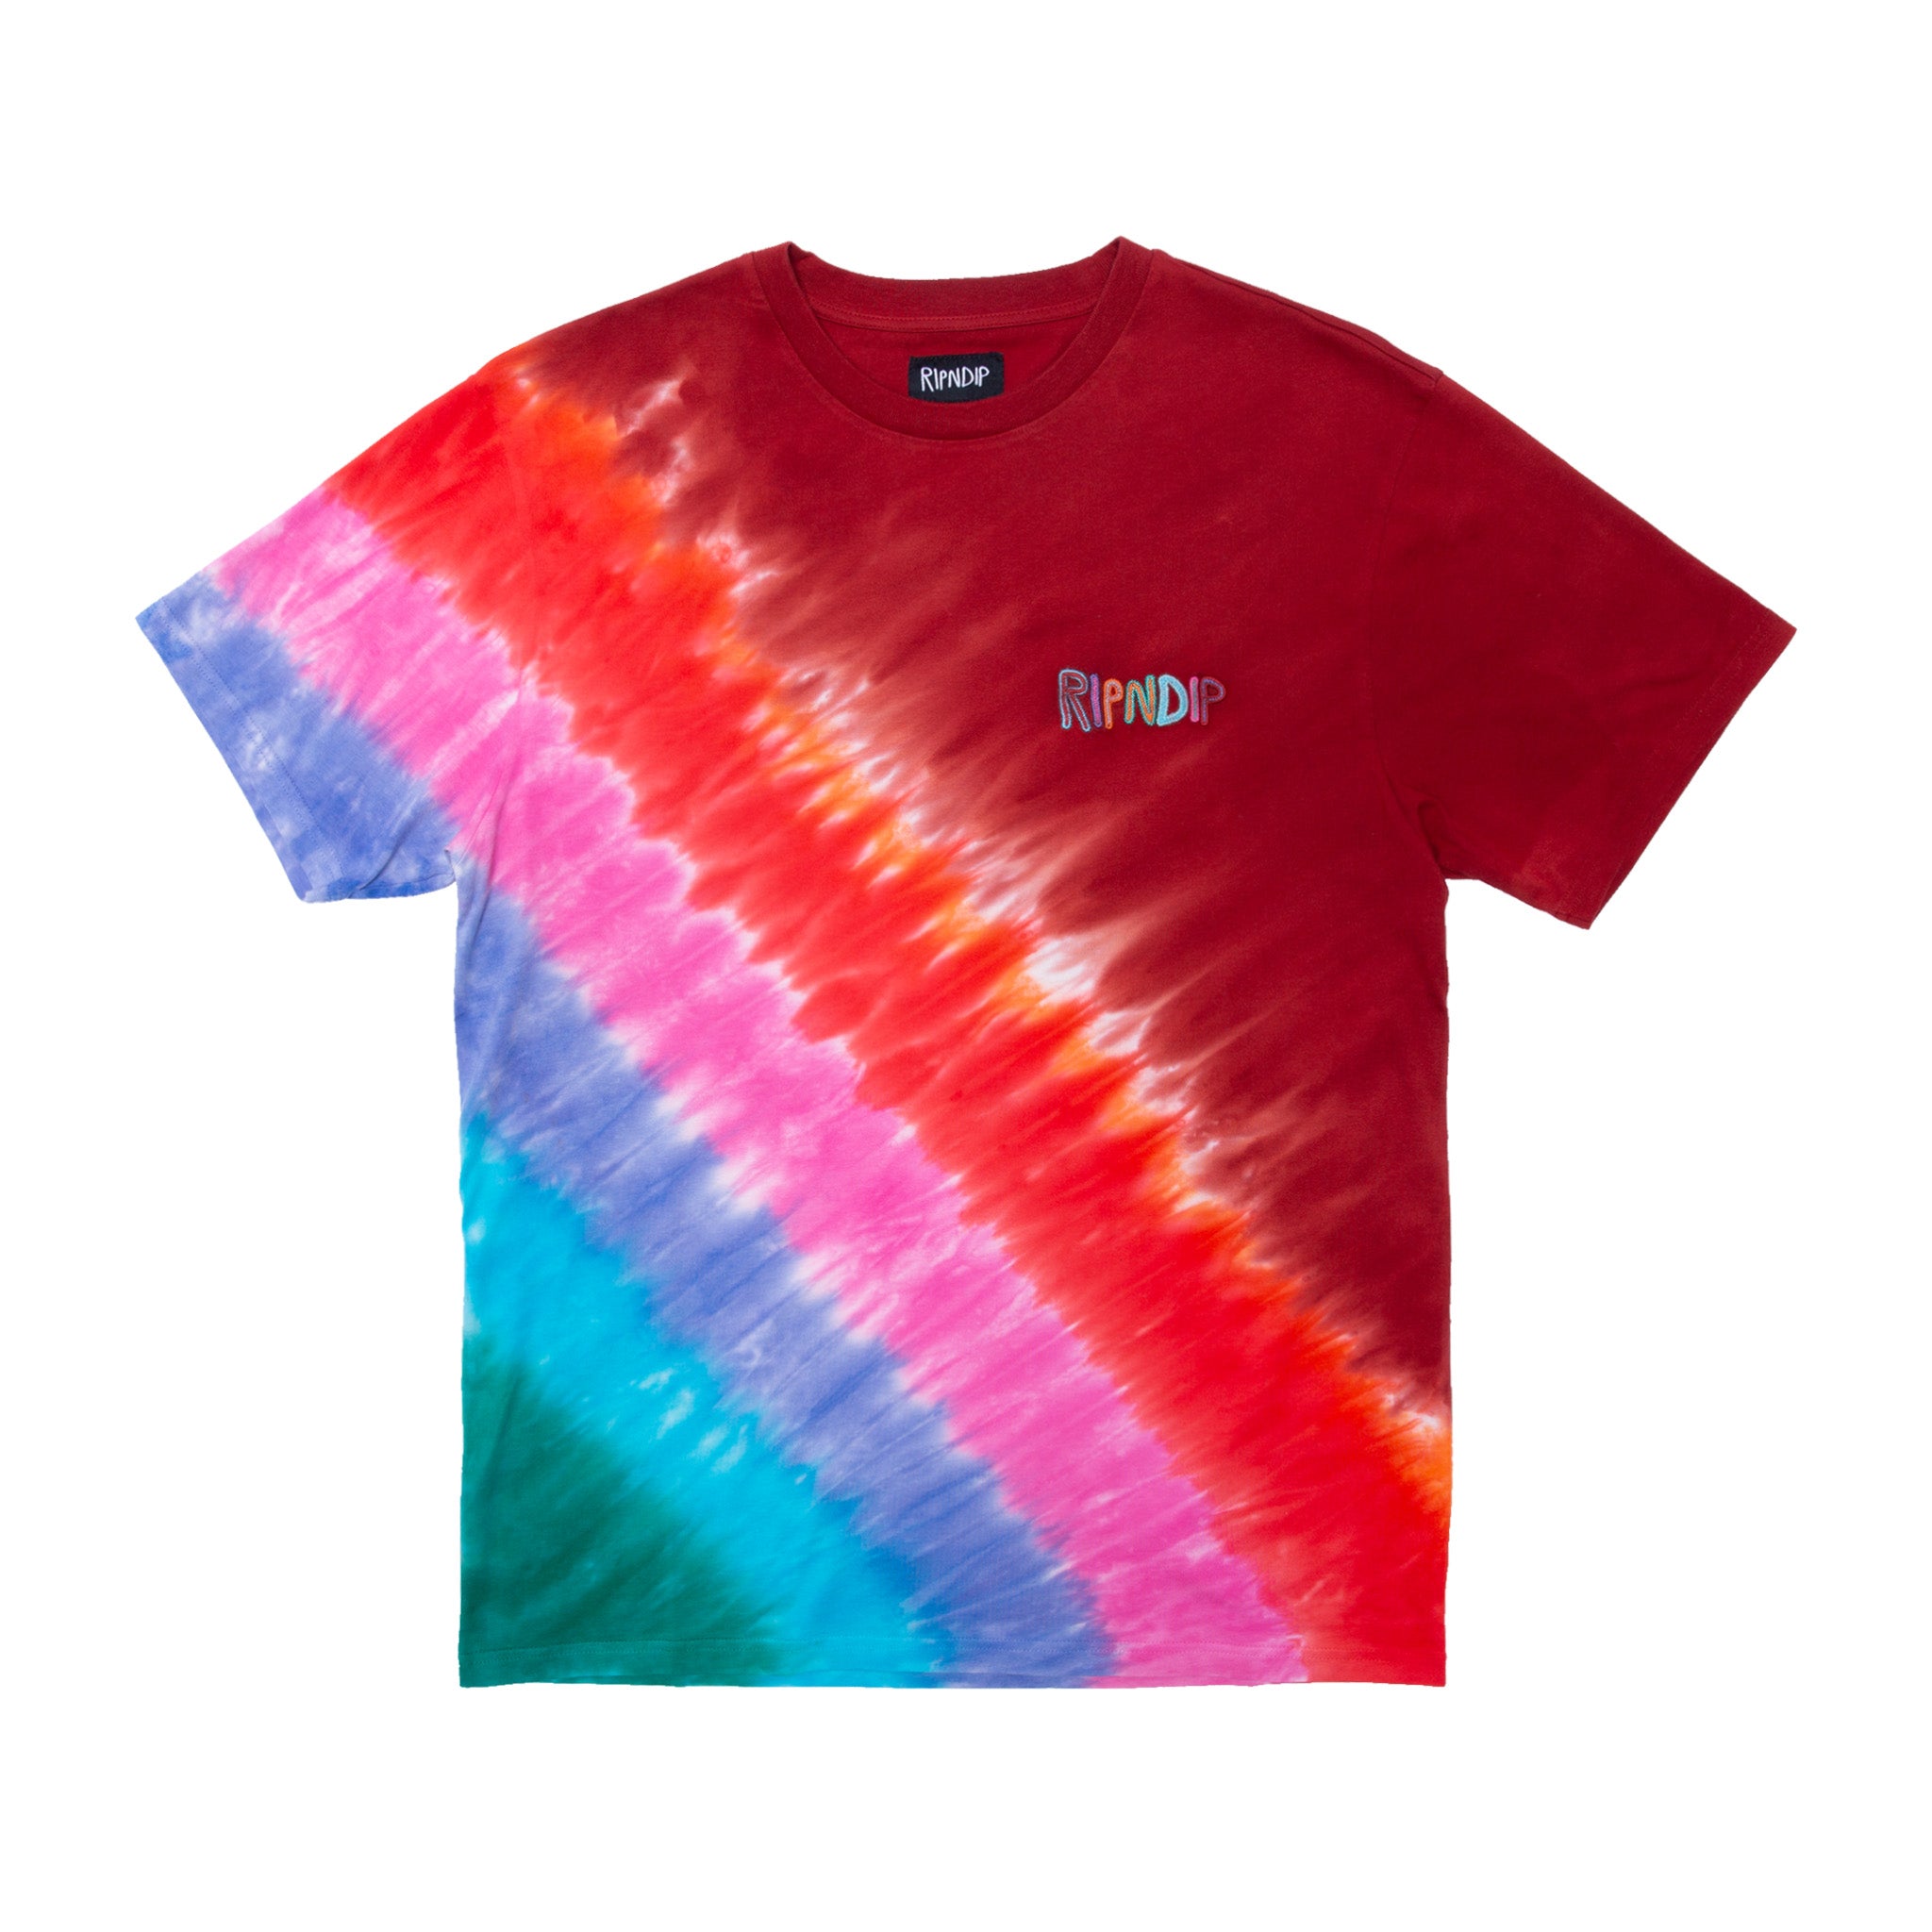 OG Prisma Embroidered Tee (Red Tie Dye) – RIPNDIP